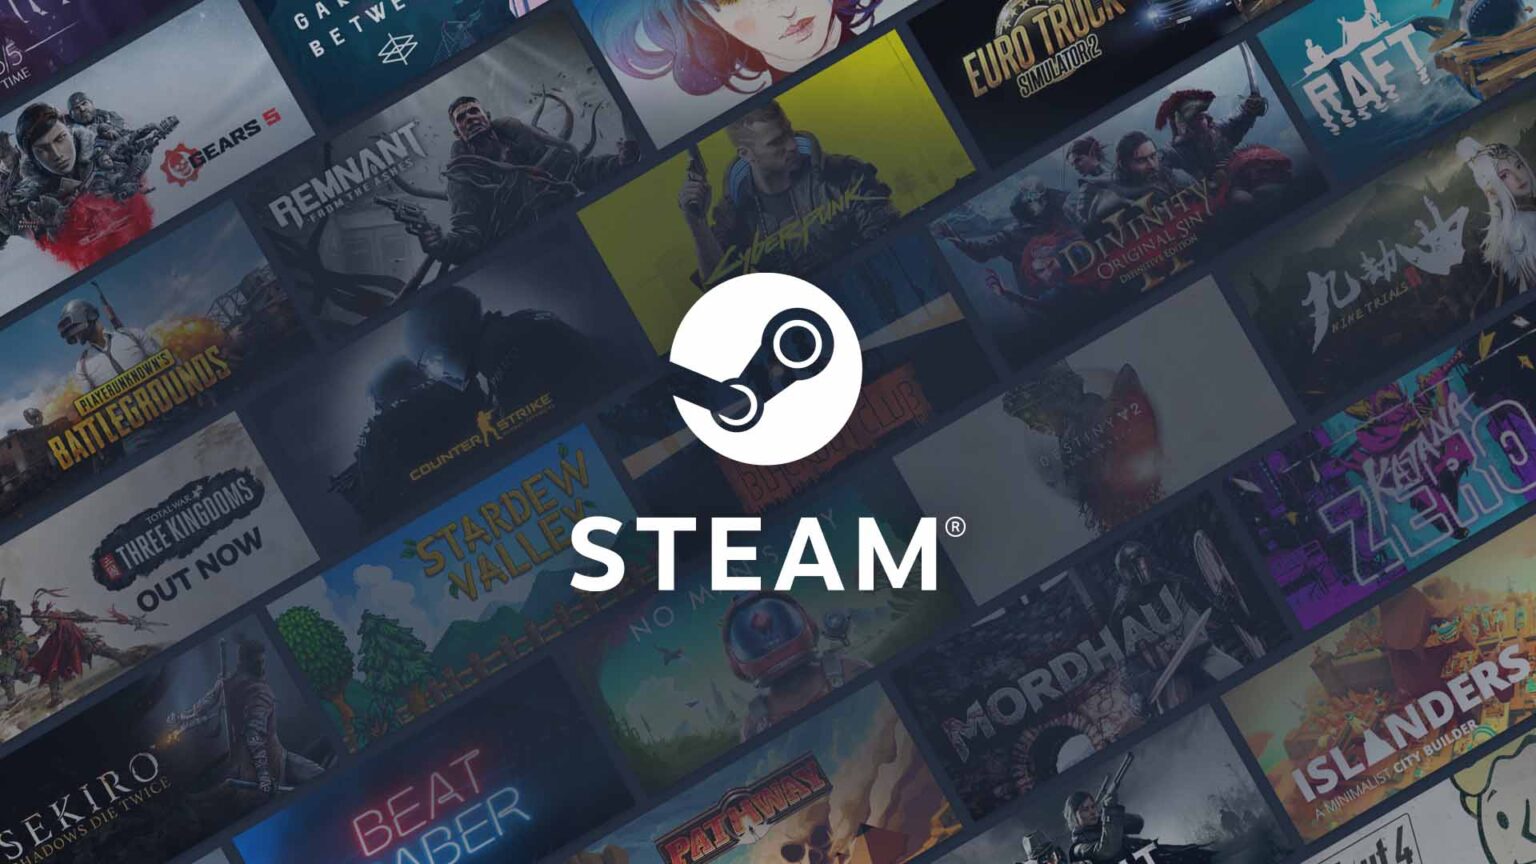 Looking for a new gaming obsession? Try one of these popular video games on Steam. One of these is sure to be your new favorite.